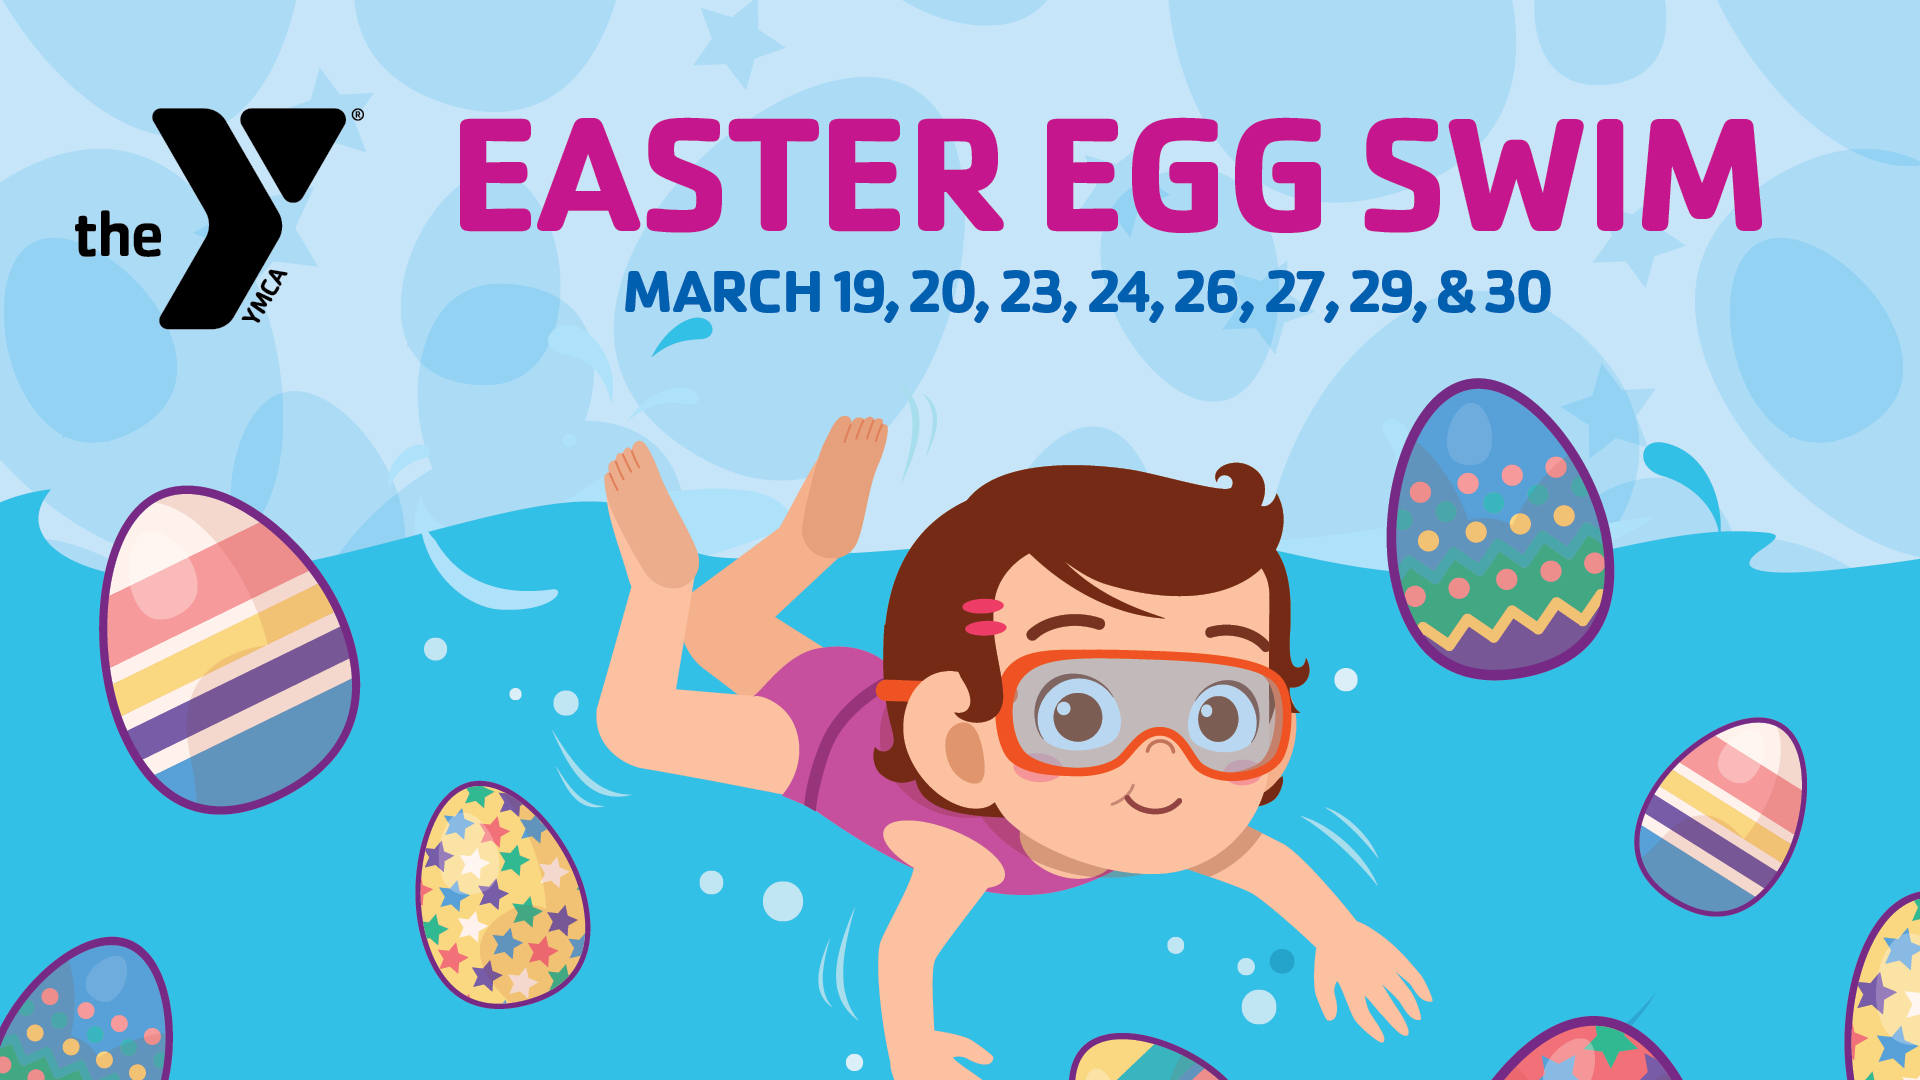 Featured image for “Easter Egg Swim”